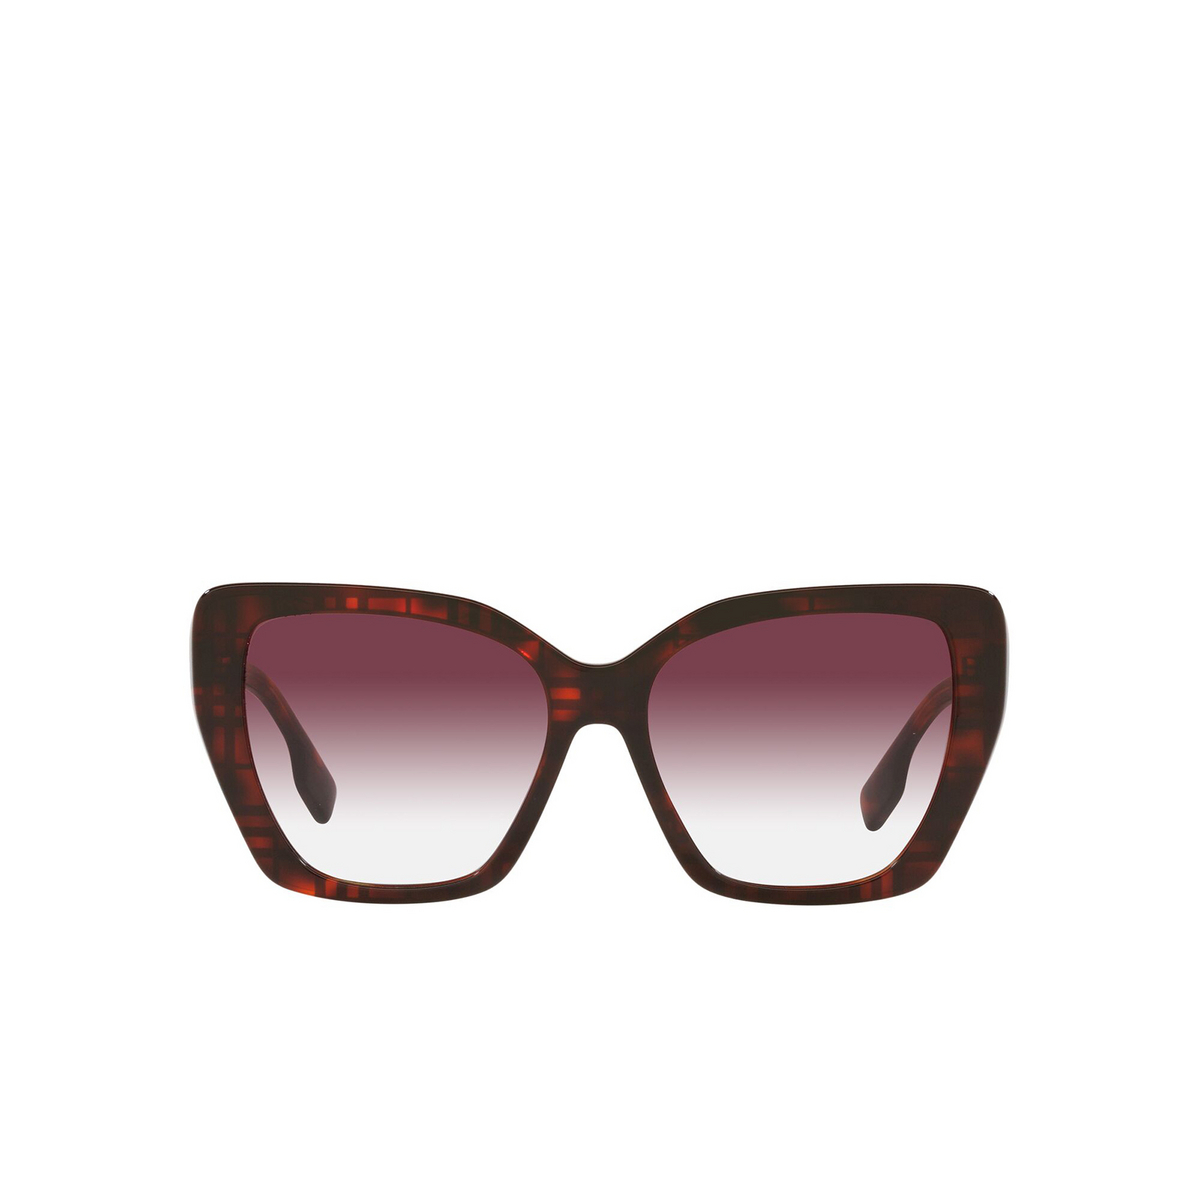 Burberry® Cat-eye Sunglasses: BE4366 Tasmin color 39848H Top Check / Red Havana - front view